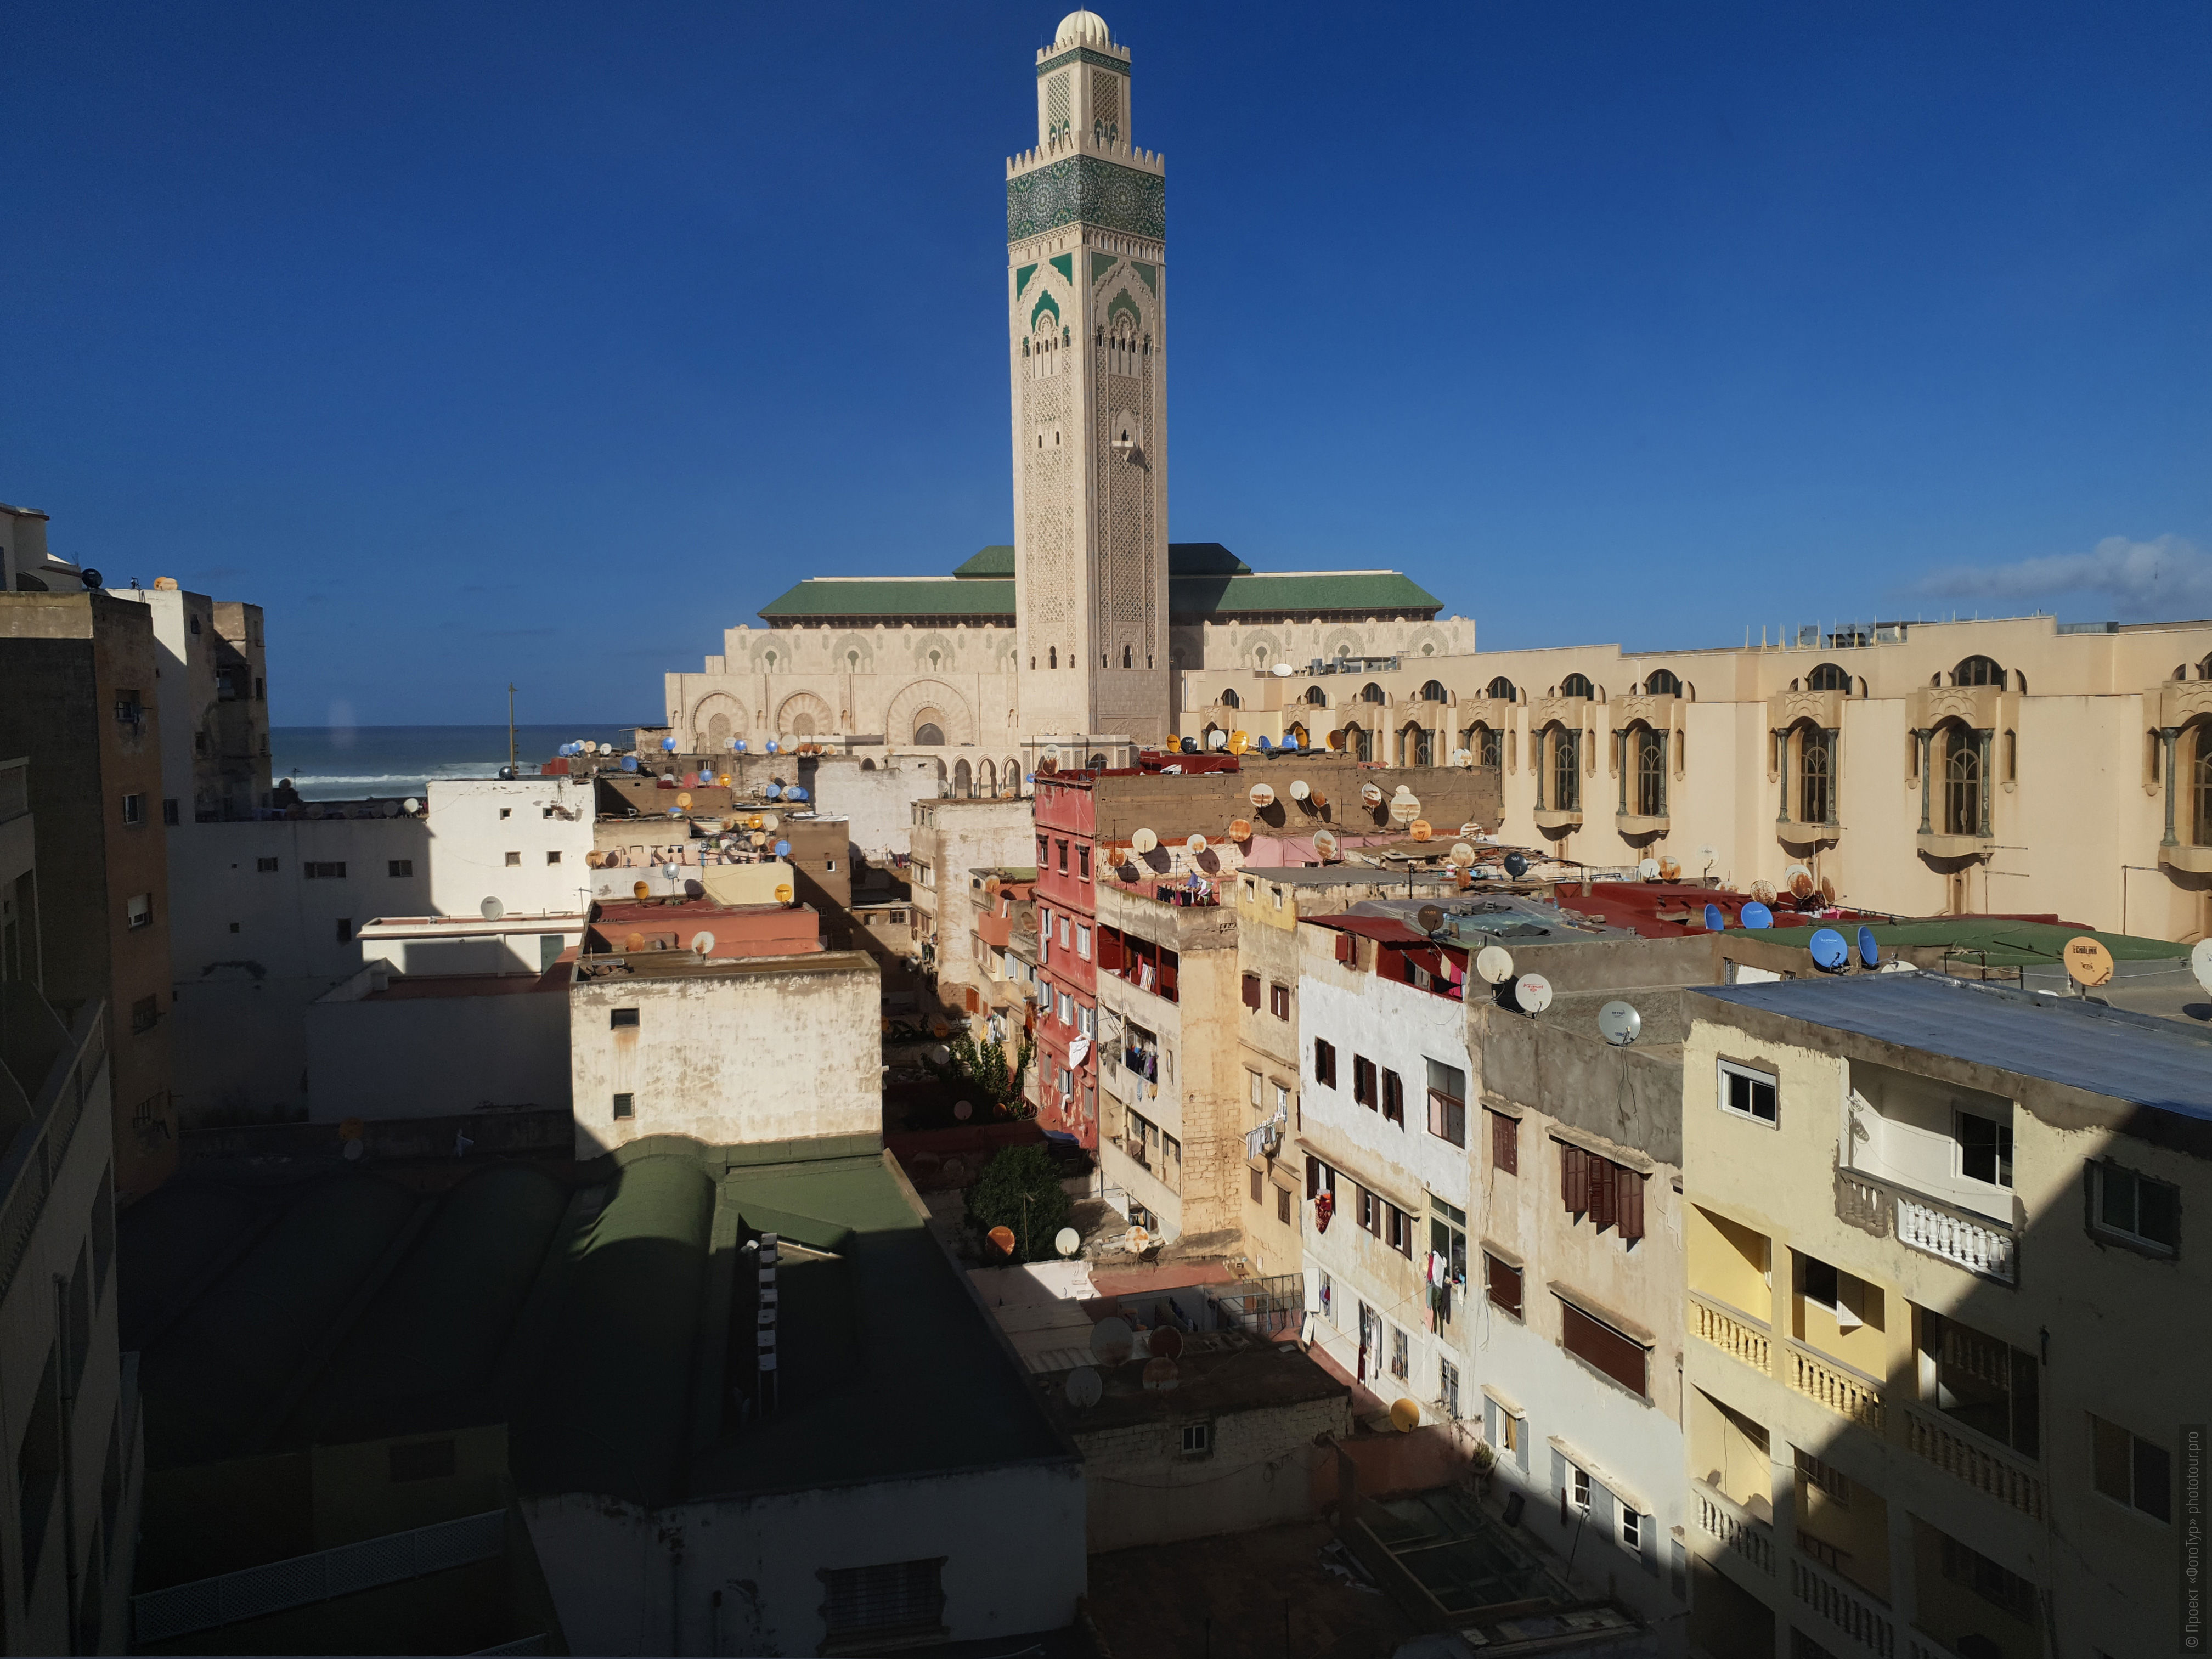 Hassan II Mosque. Adventure photo tour: medina, cascades, sands and ports of Morocco, April 4 - 17, 2020.